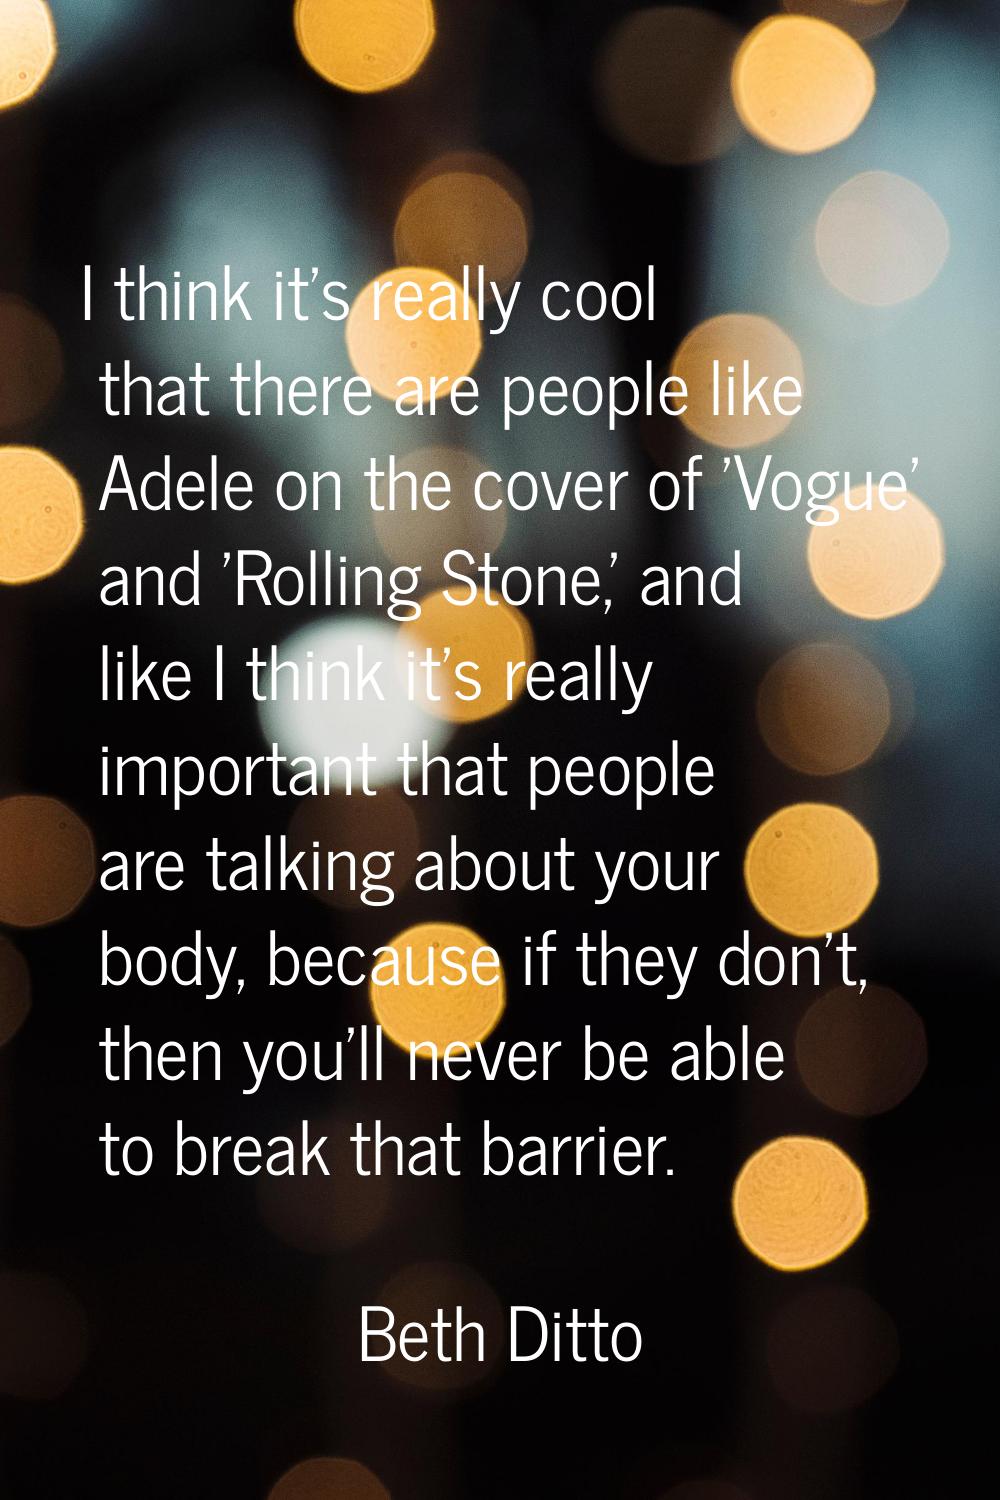 I think it's really cool that there are people like Adele on the cover of 'Vogue' and 'Rolling Ston